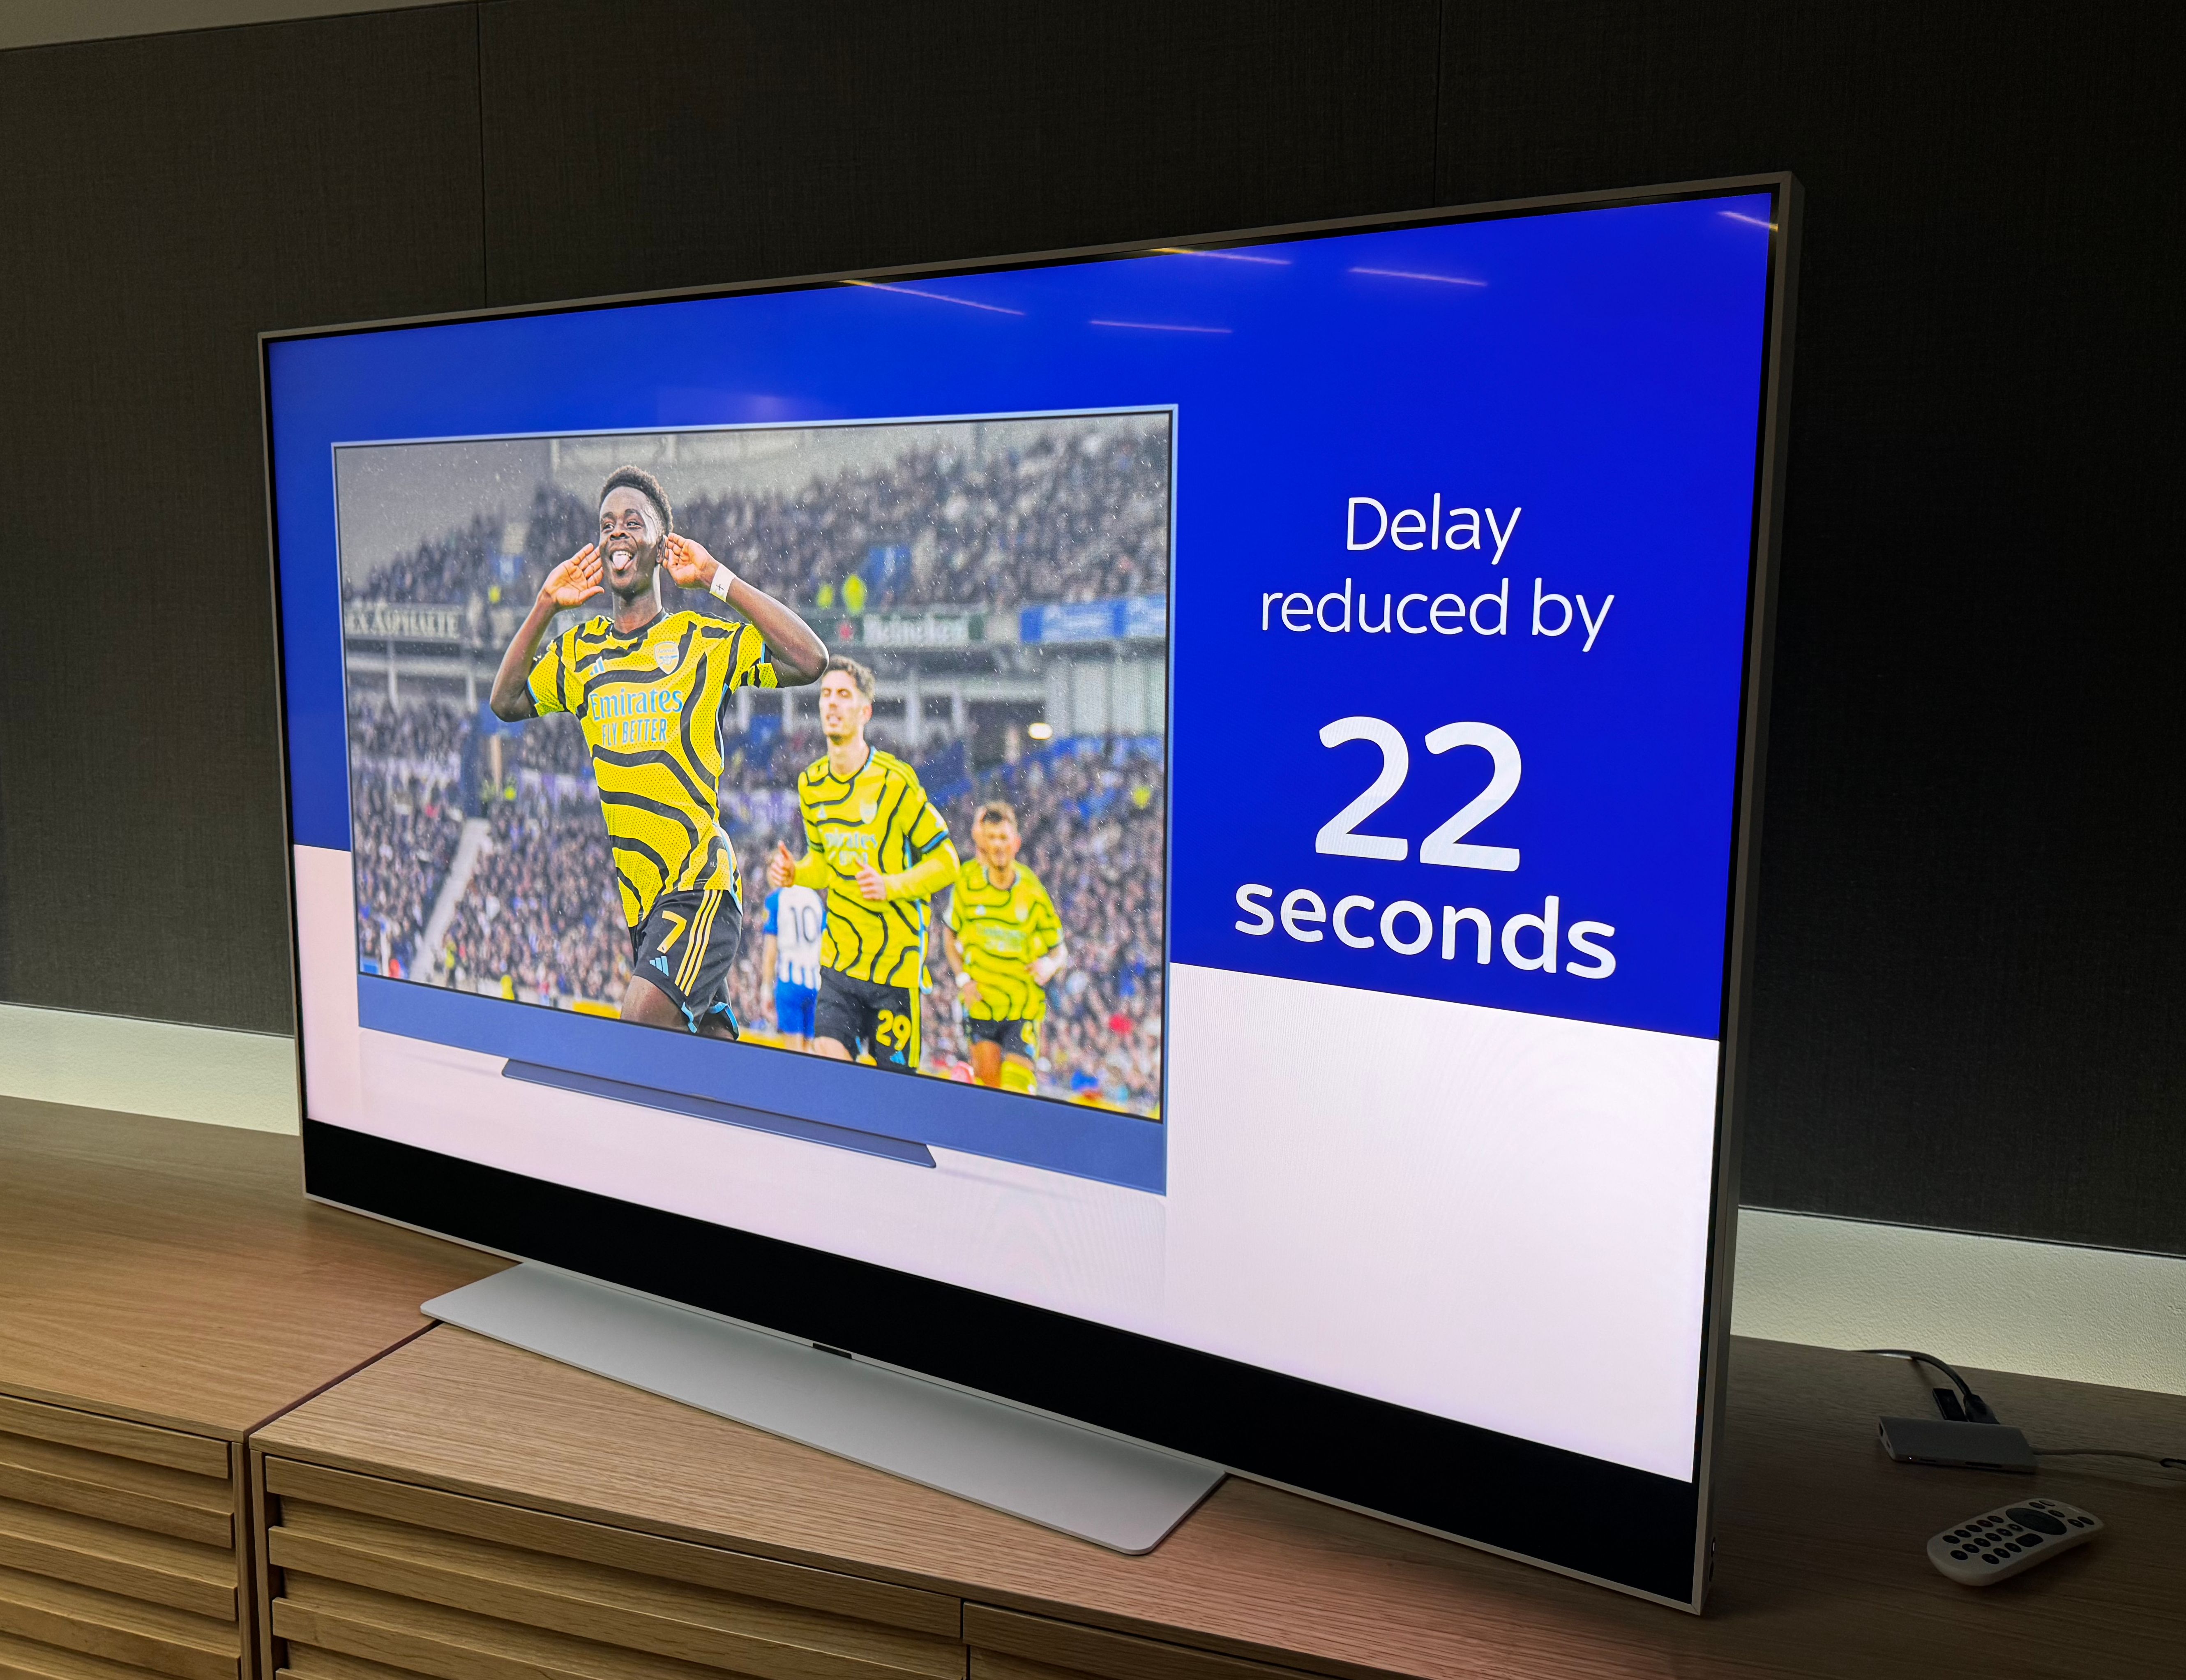 sky glass with a promotional image showing the reduction in the delay for online broadcasts